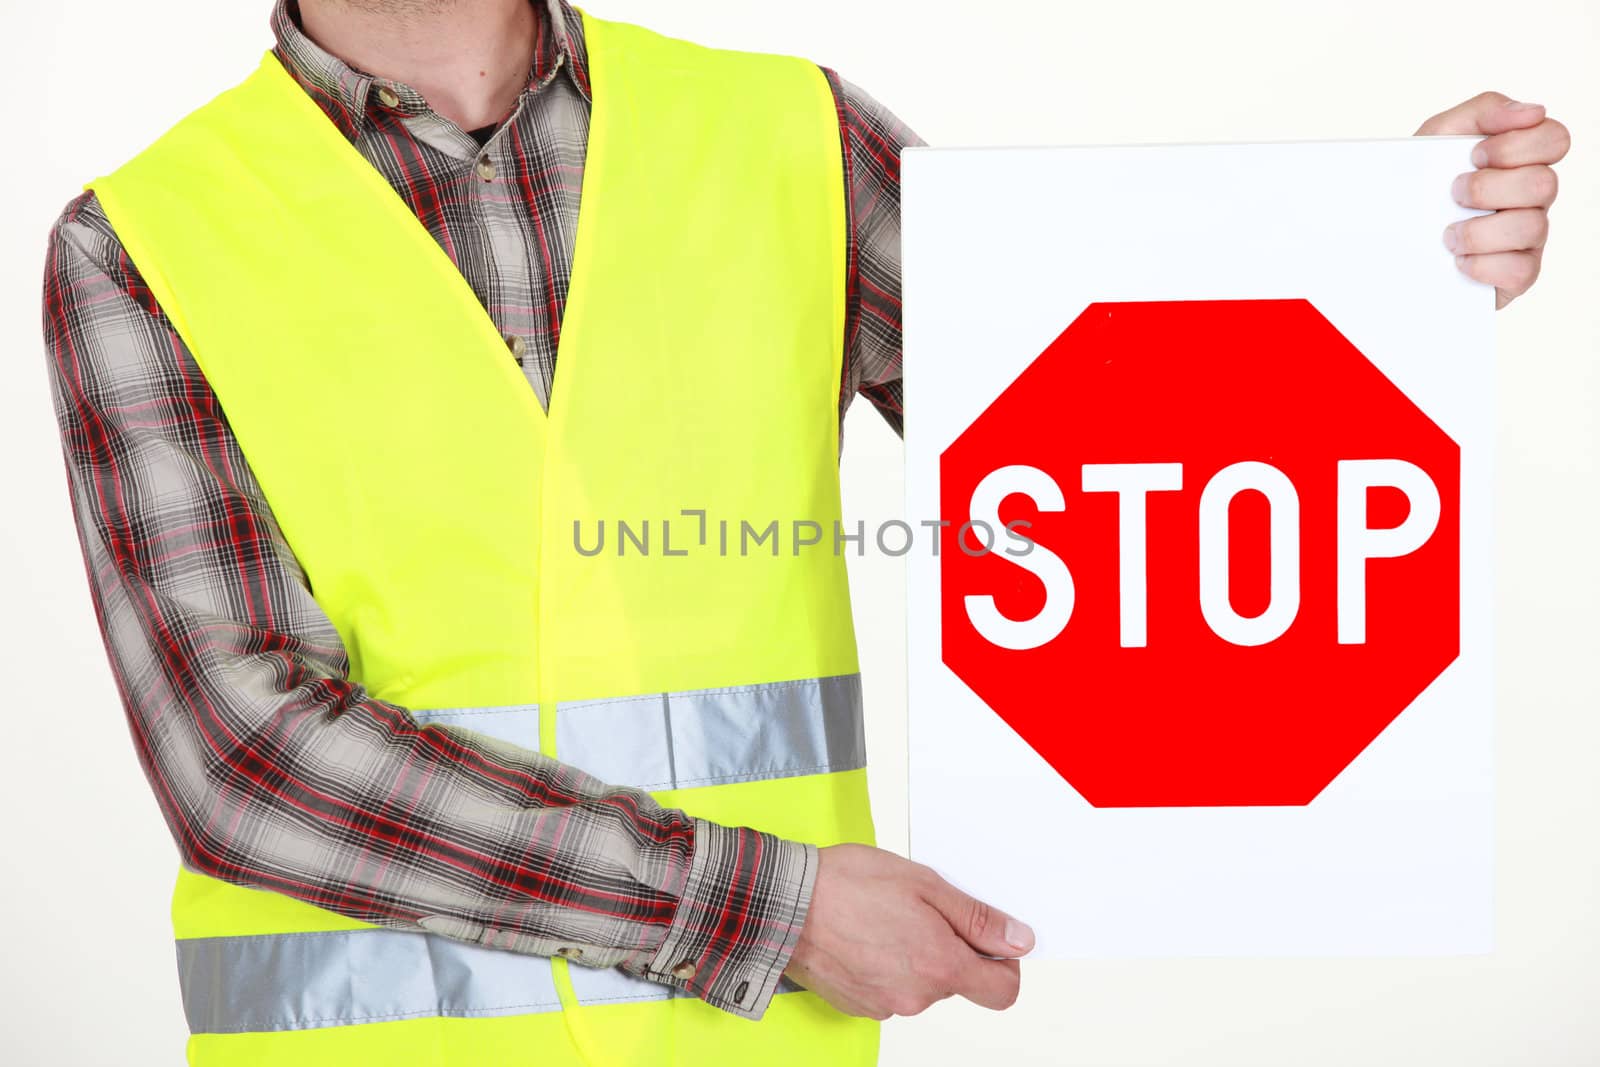 Highway worker with stop sign